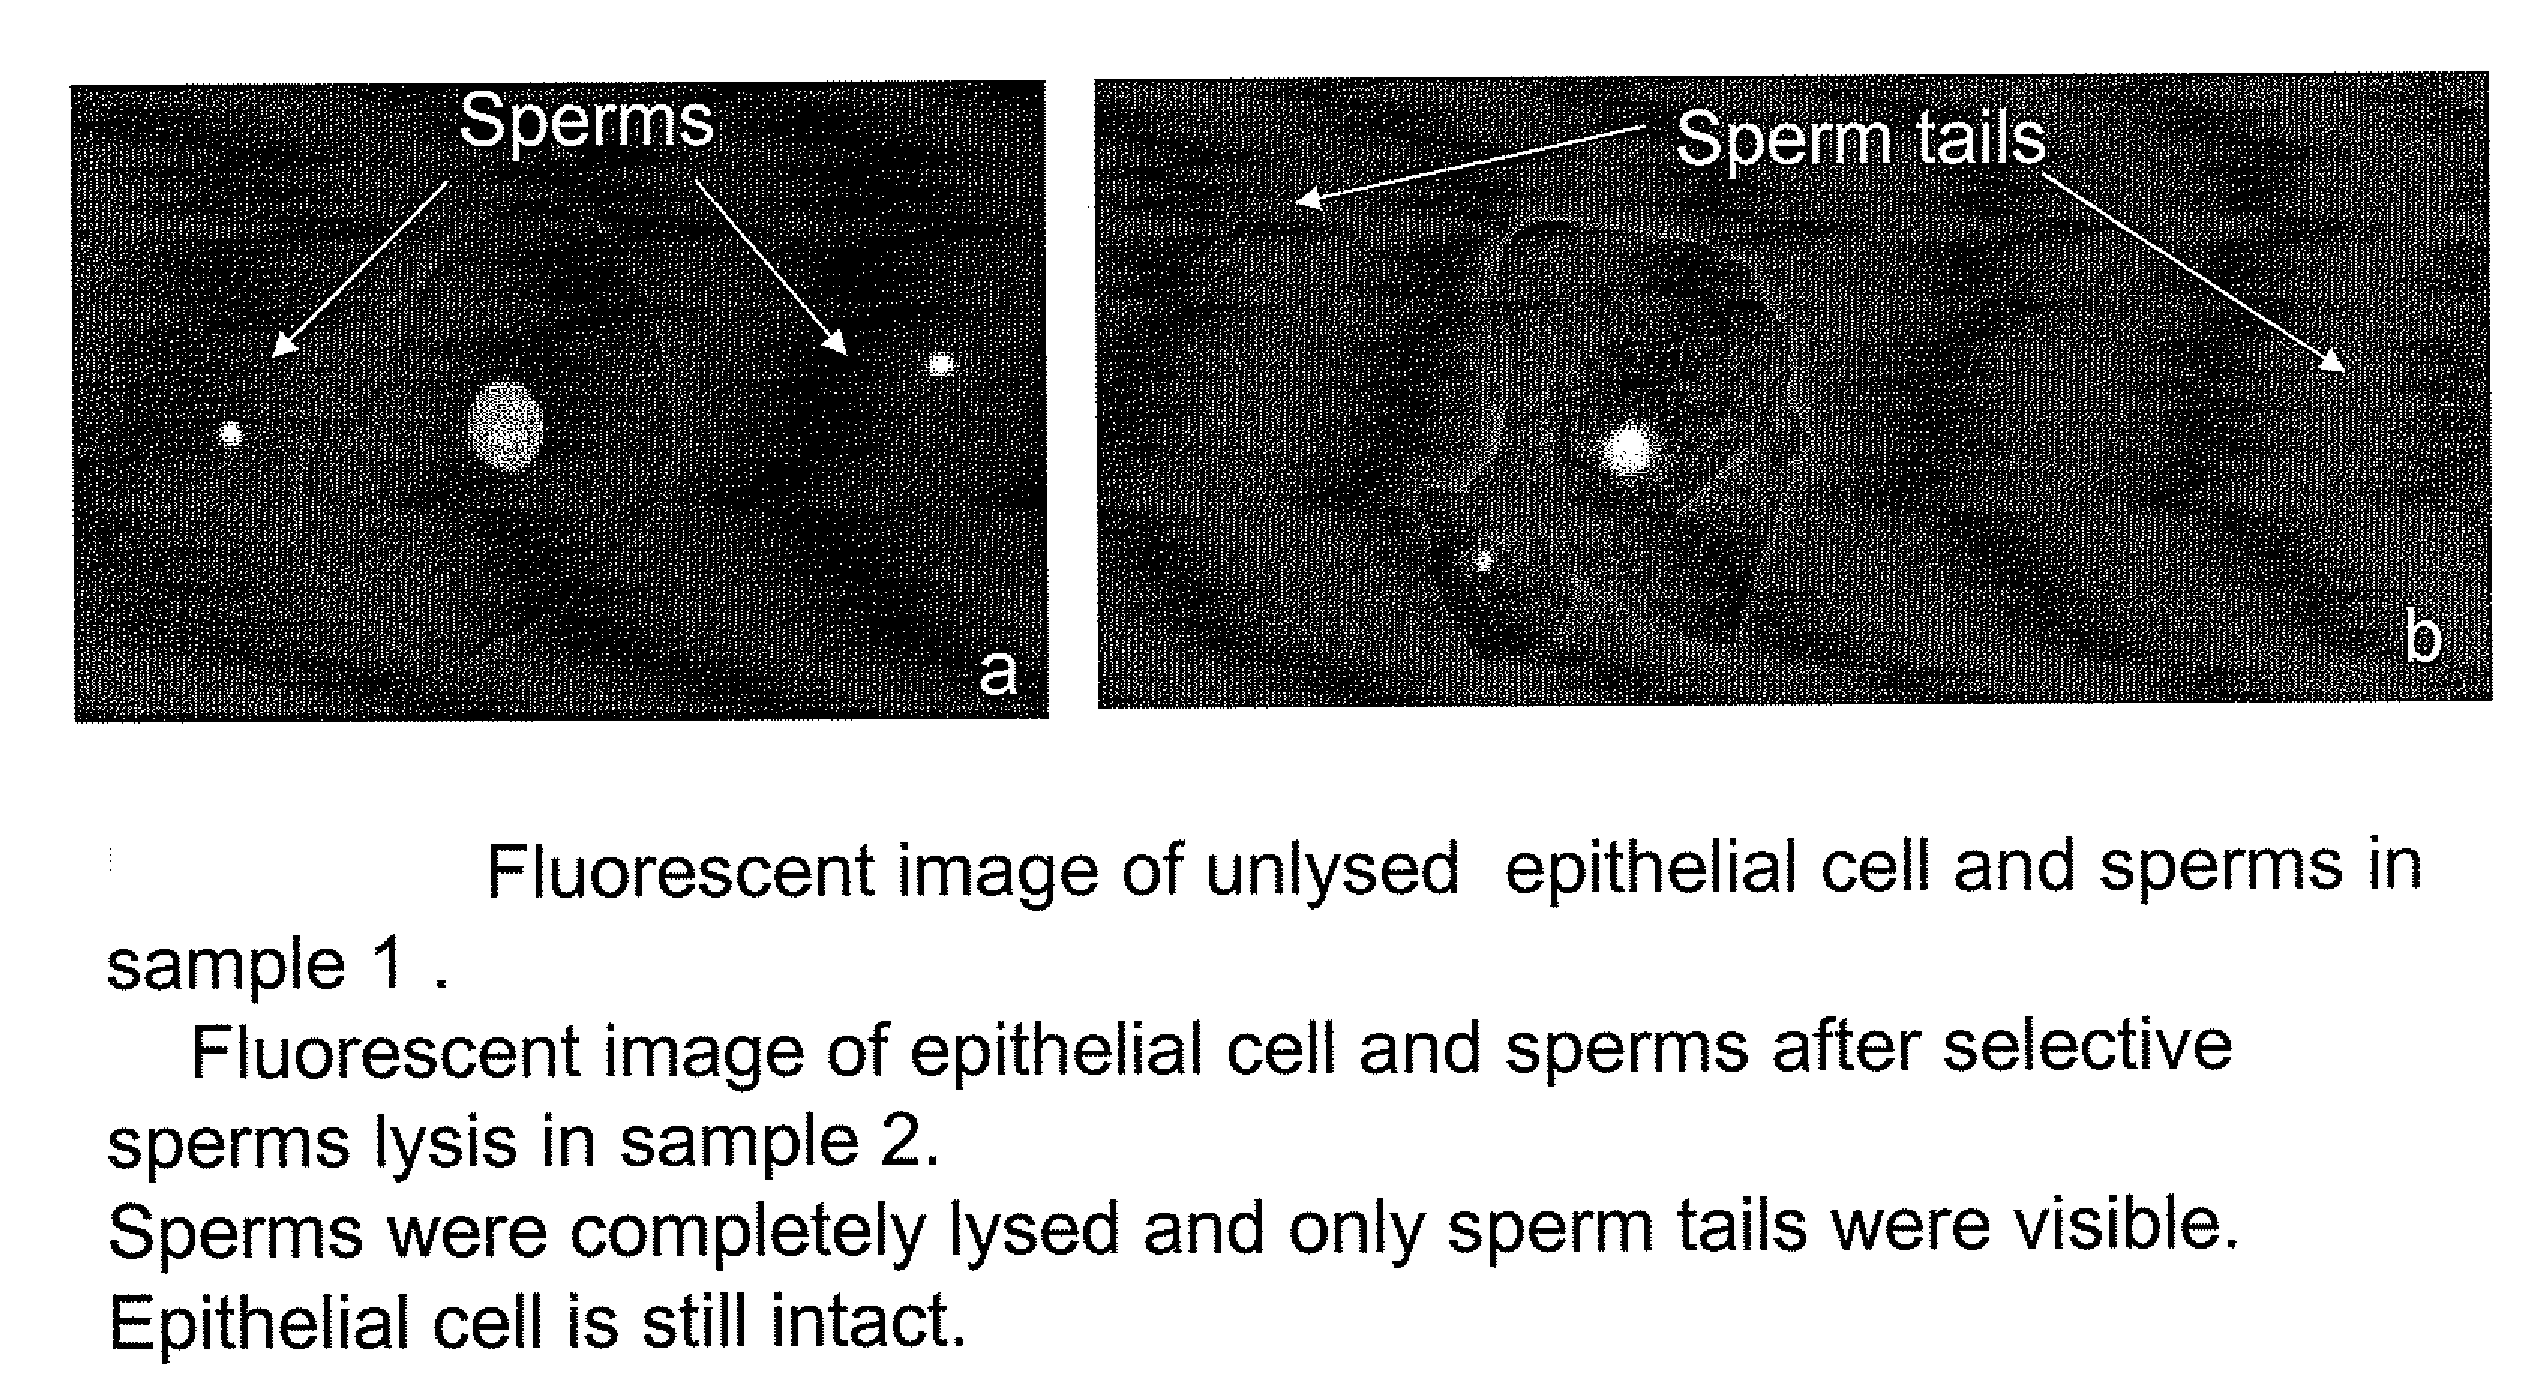 Selective Lysis of Sperm Cells